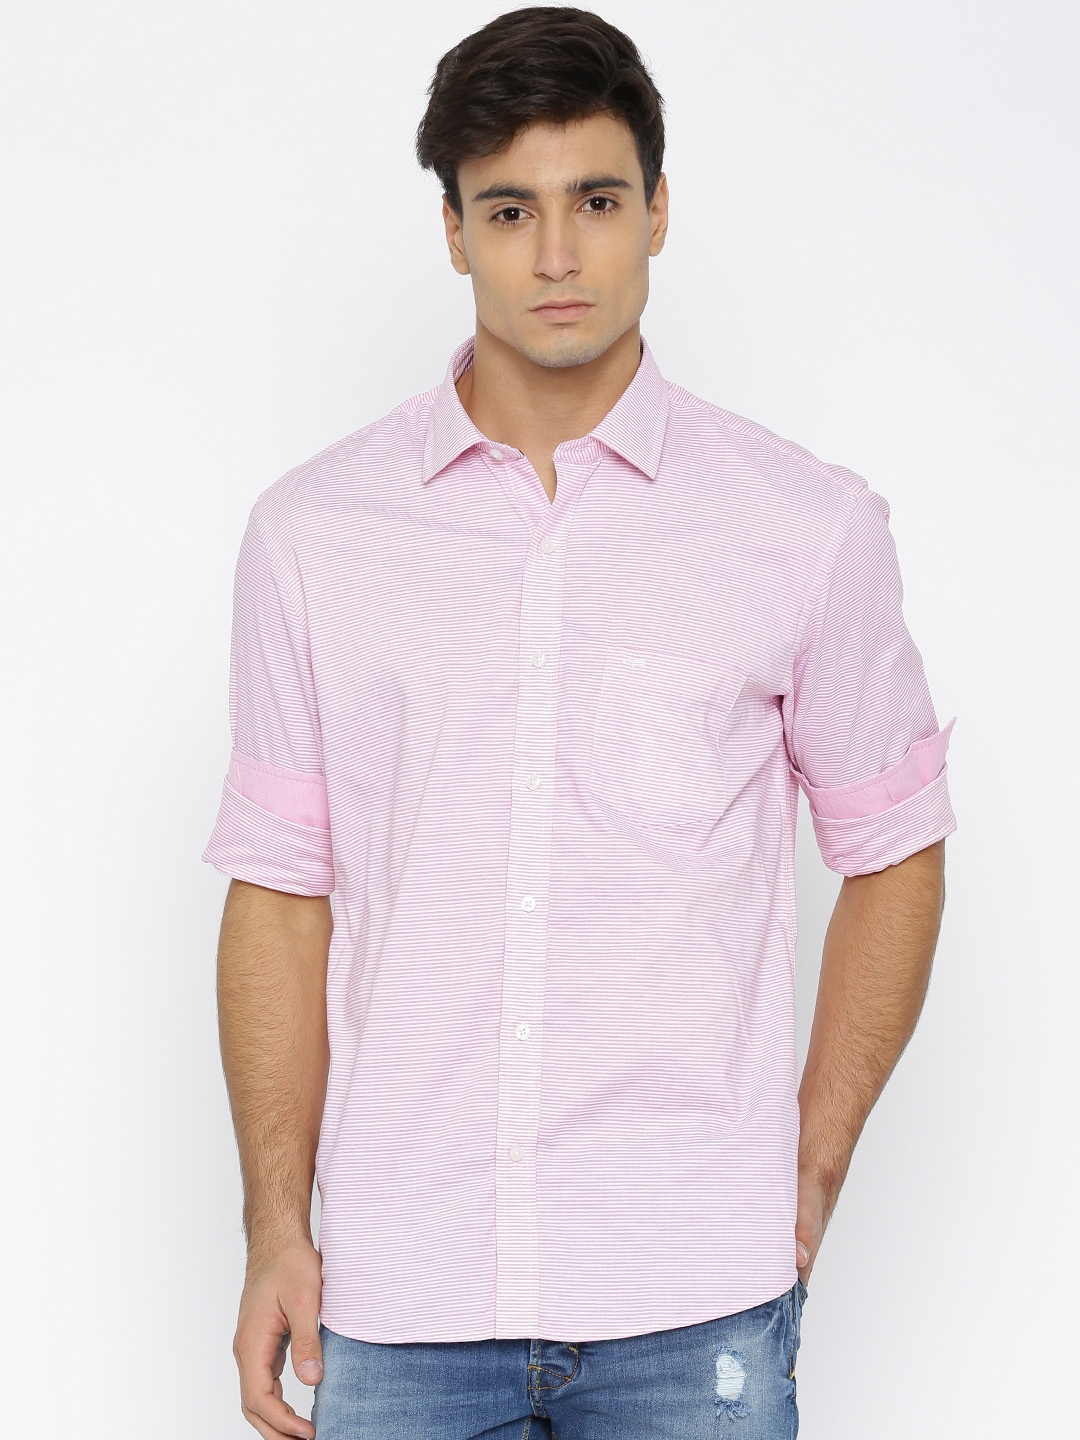 Buy ColorPlus Pink & White Striped Tailored Fit Casual Shirt - Shirts ...